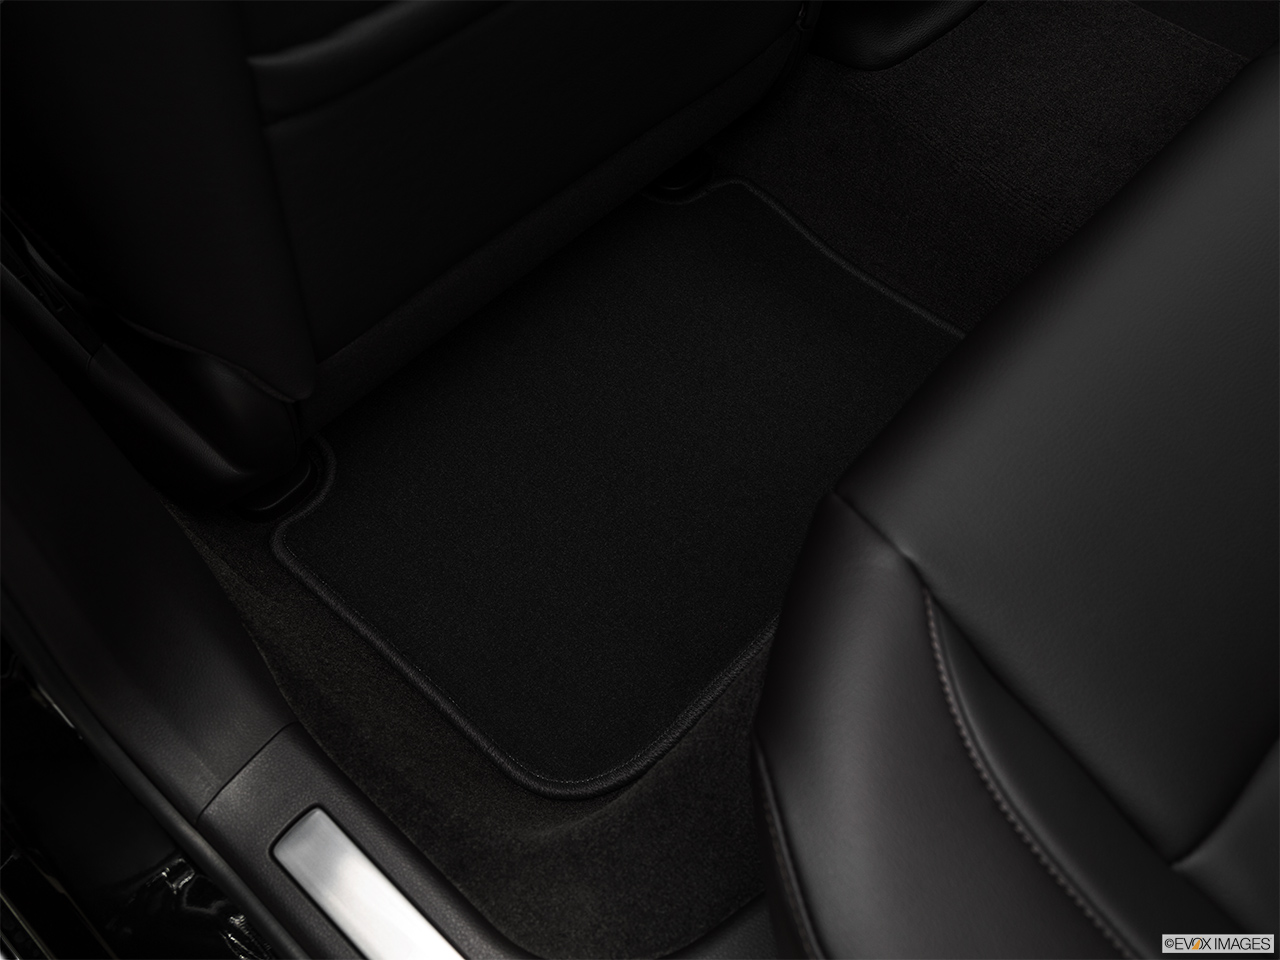 2017 Acura TLX Base Rear driver's side floor mat. Mid-seat level from outside looking in. 